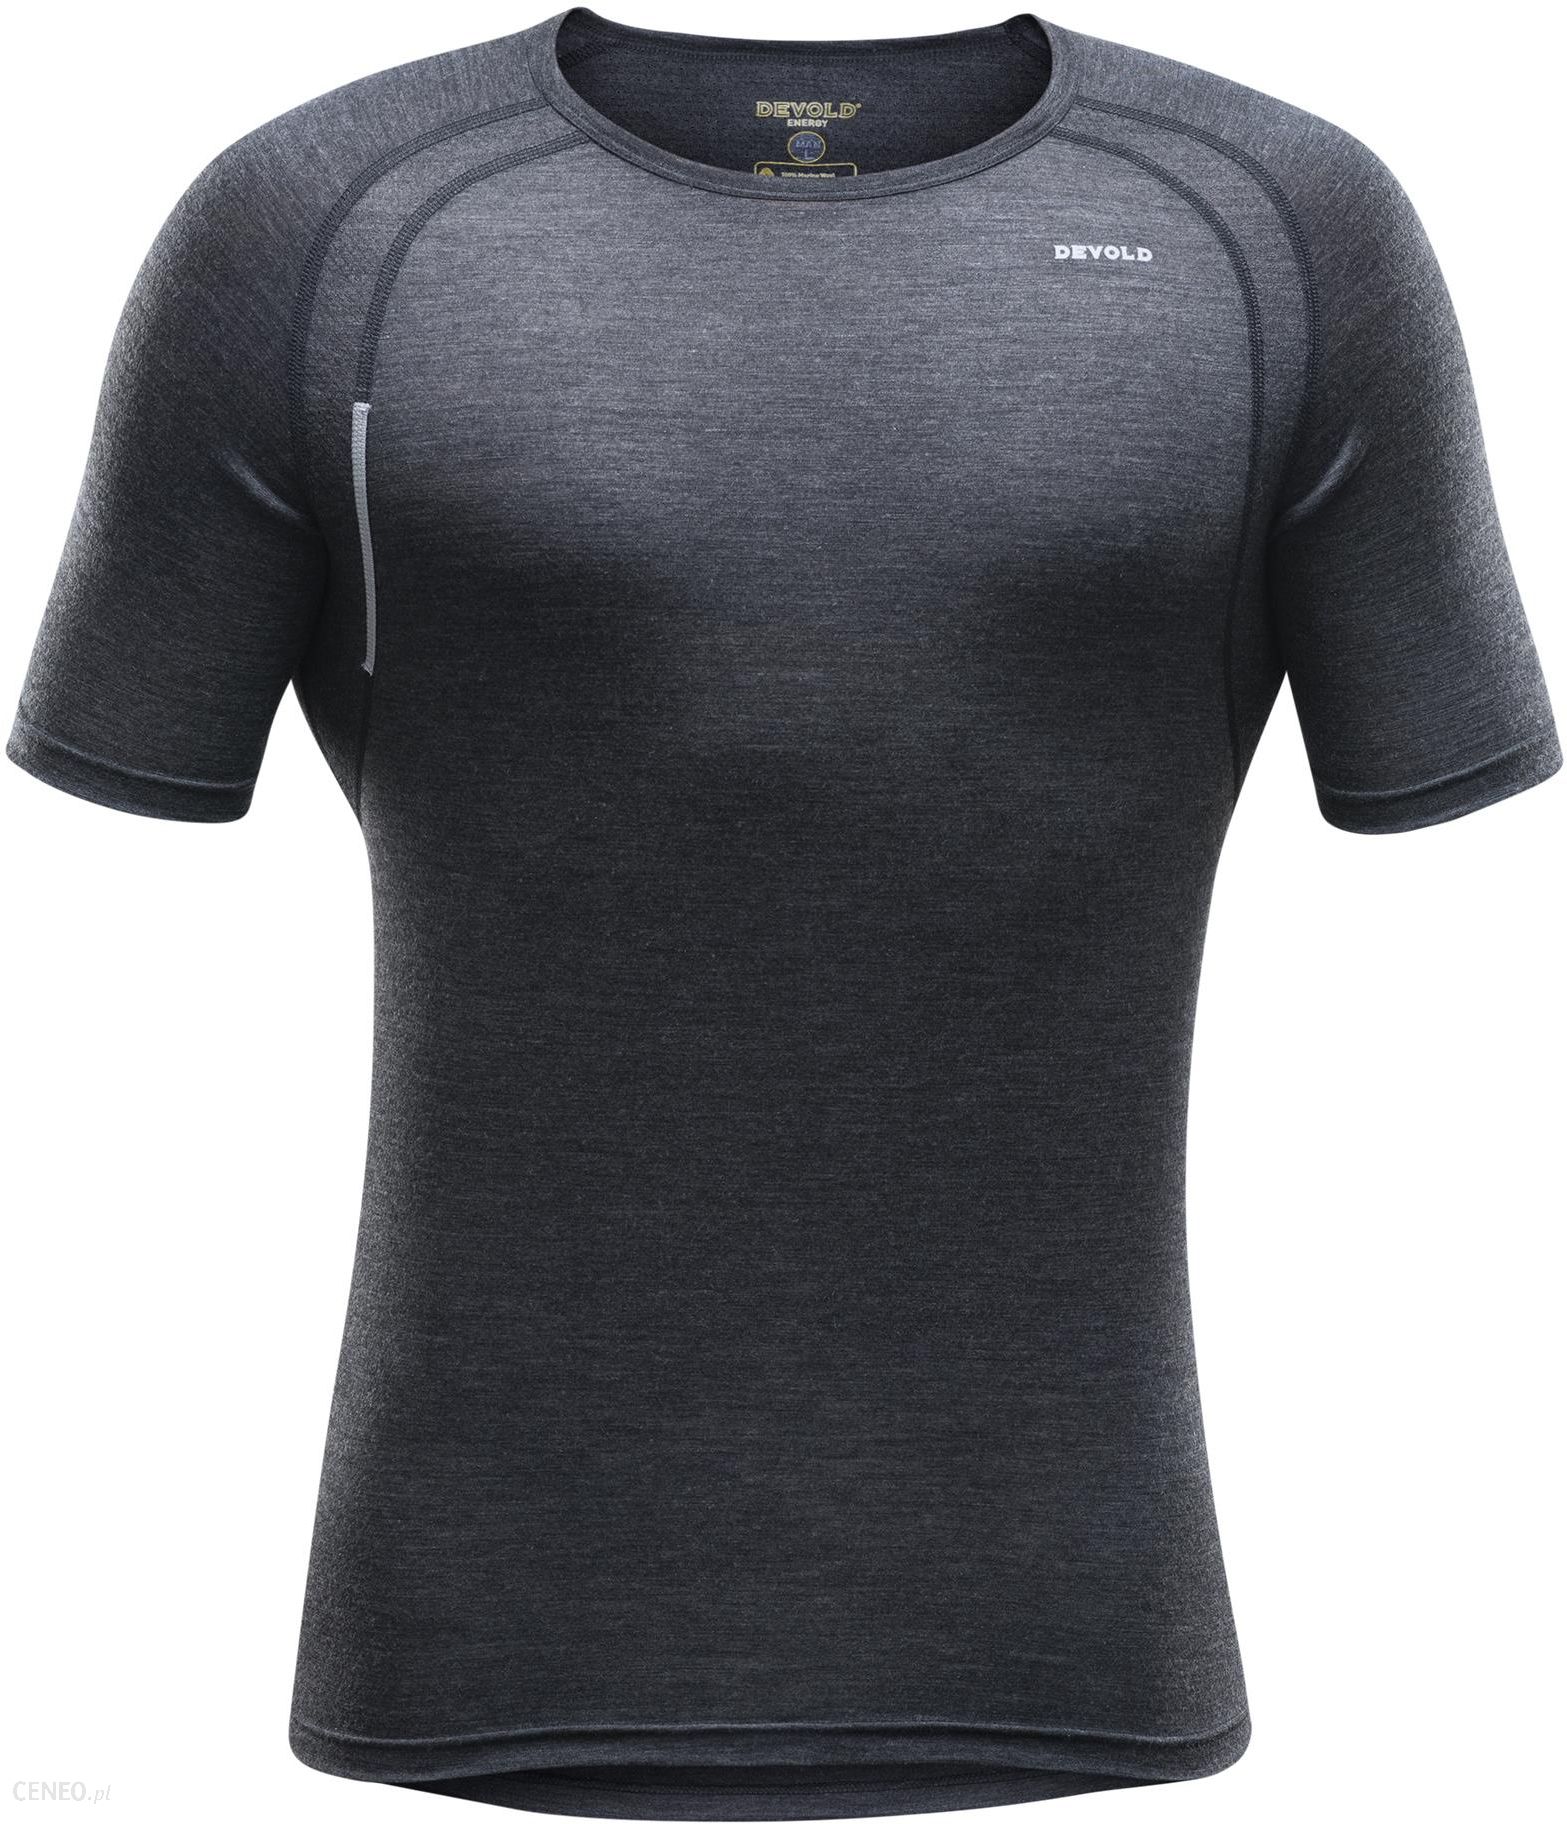 Devold Running T-Shirt Anthracite - Ceny i opinie - Ceneo.pl